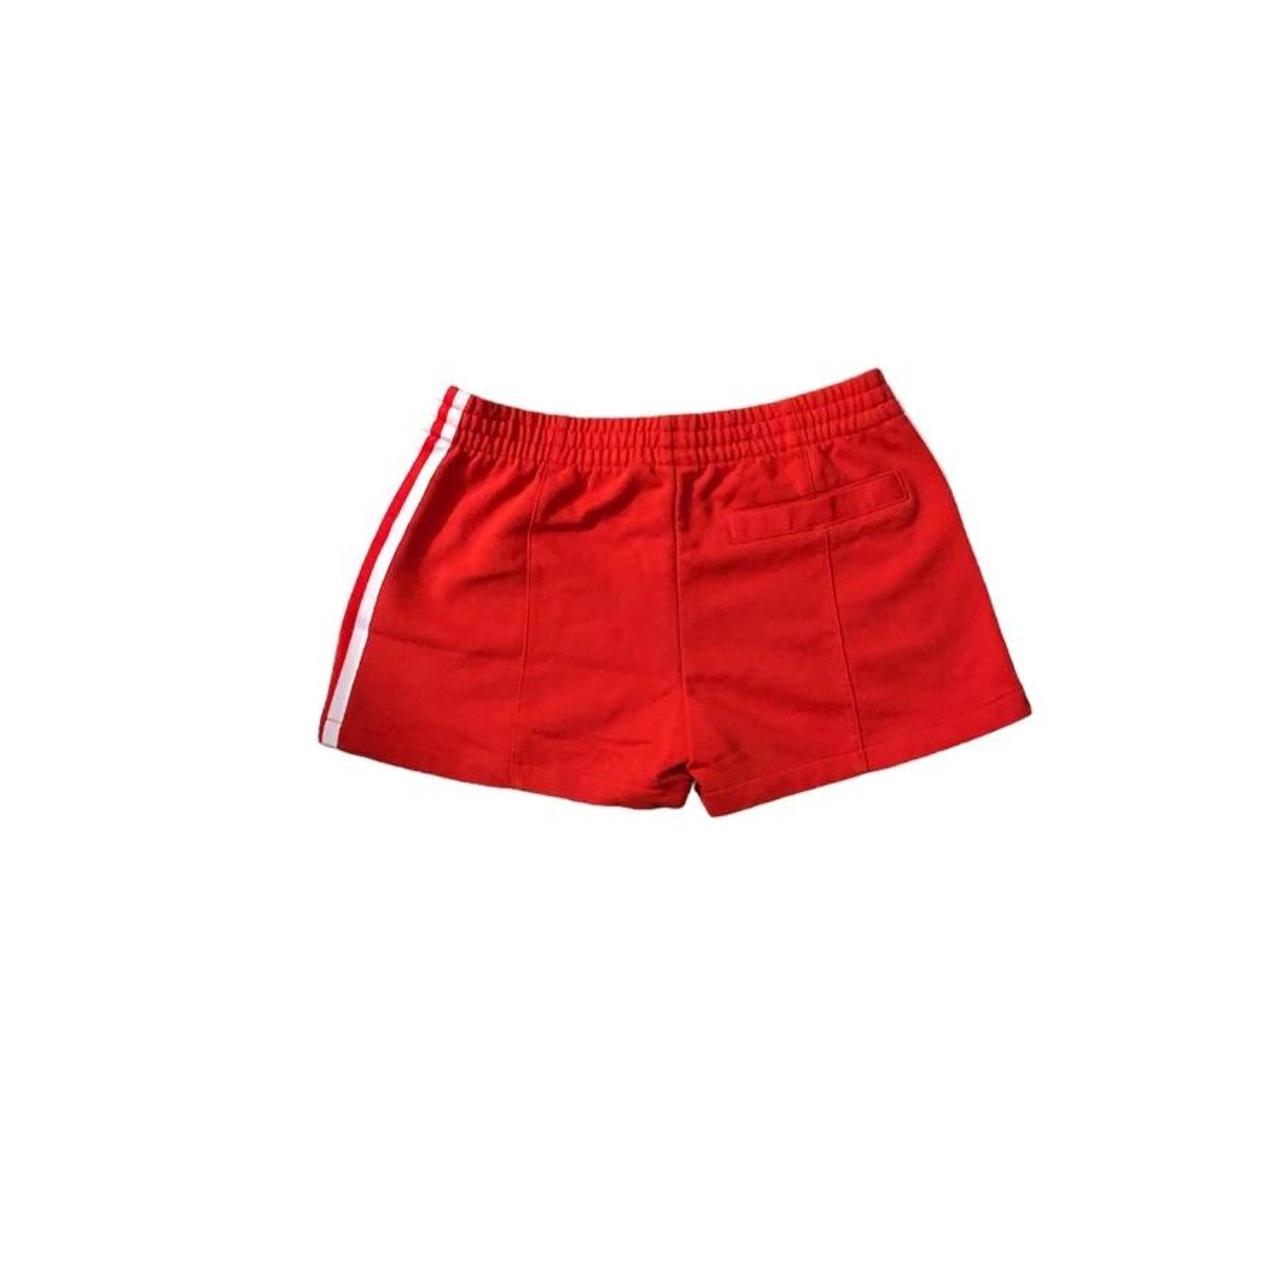 Adidas Women's Red and White Shorts (2)